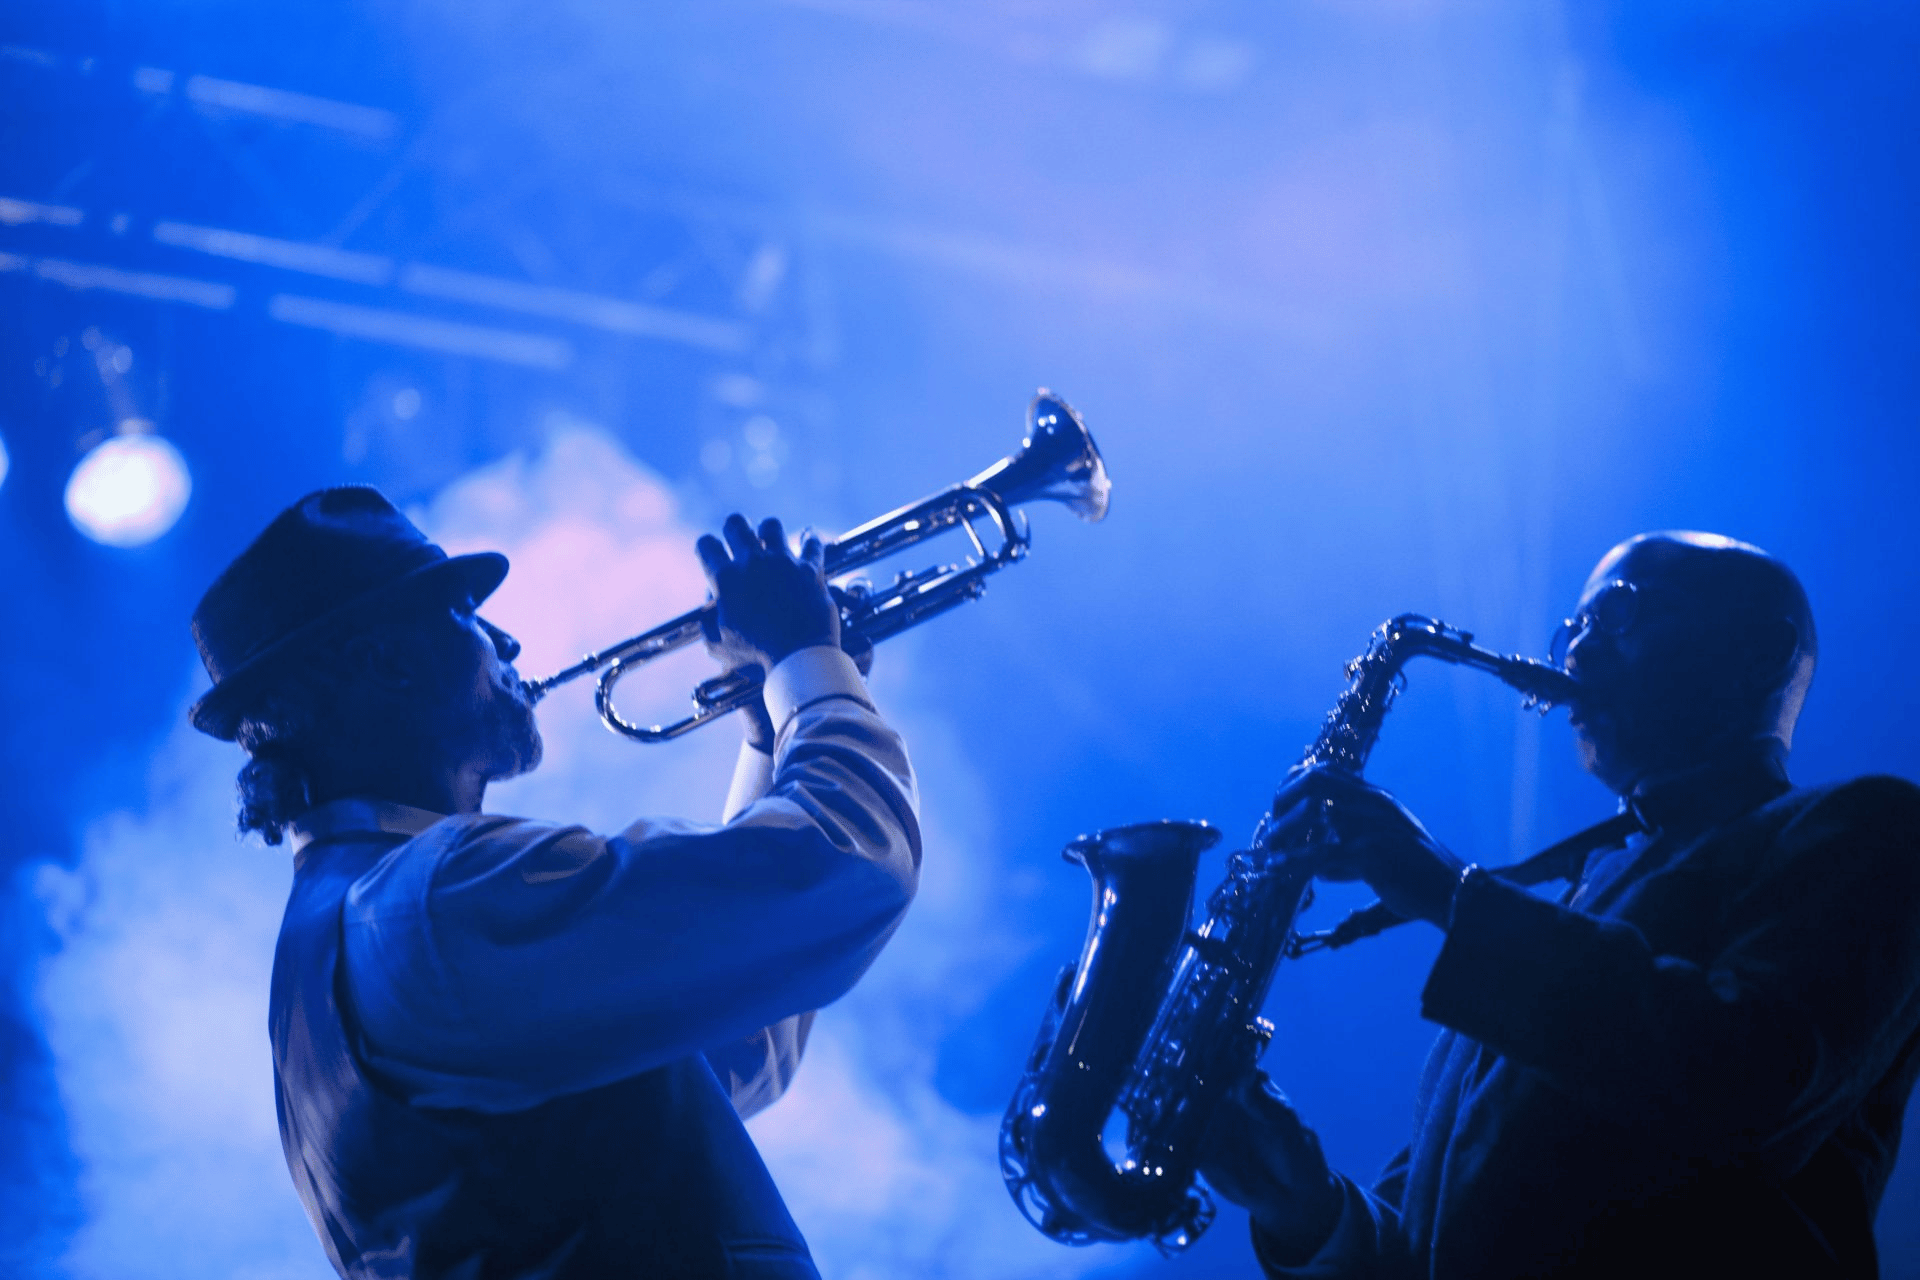 jazz players playing trumpet and saxophone